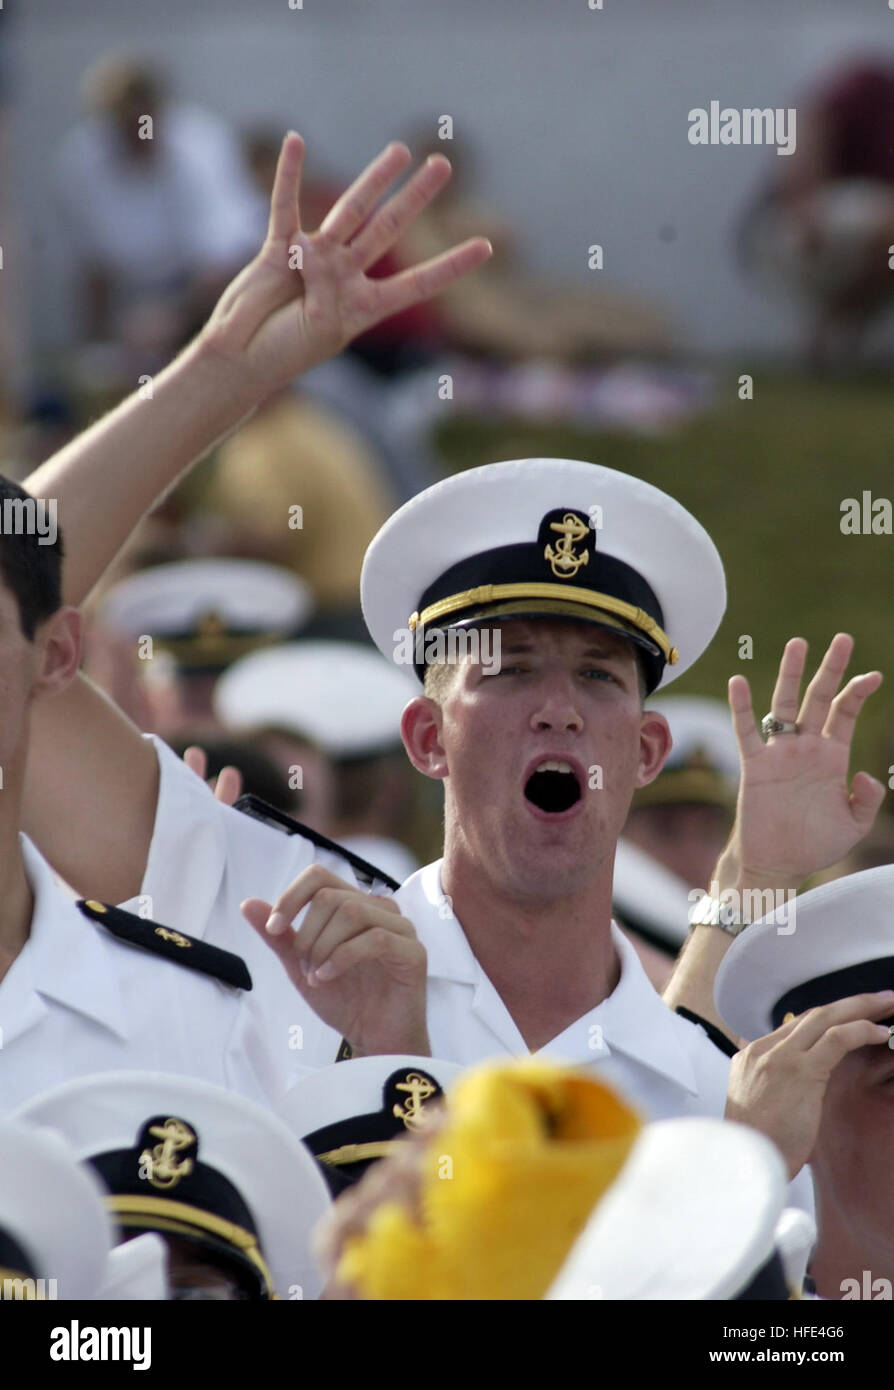 040925-N-0962S-012  Annapolis, Md. (Sept. 25, 2004) -- A U.S. Naval Academy Midshipmen signifies the Navy's first 4-0 start in 25 years as he and the rest of the midshipmen chant, 'Four and oh!'Ê Navy edged Vanderbilt 29-26 and is 4-0 for the first time since the Midshipmen opened the 1979 season with six straight wins.ÊU.S. Navy photo by Journalist 2nd Class Brandan W. Schulze (RELEASED) US Navy 040925-N-0962S-012 A U.S. Naval Academy Midshipmen signifies the Navy's first 4-0 start in 25 years Stock Photo